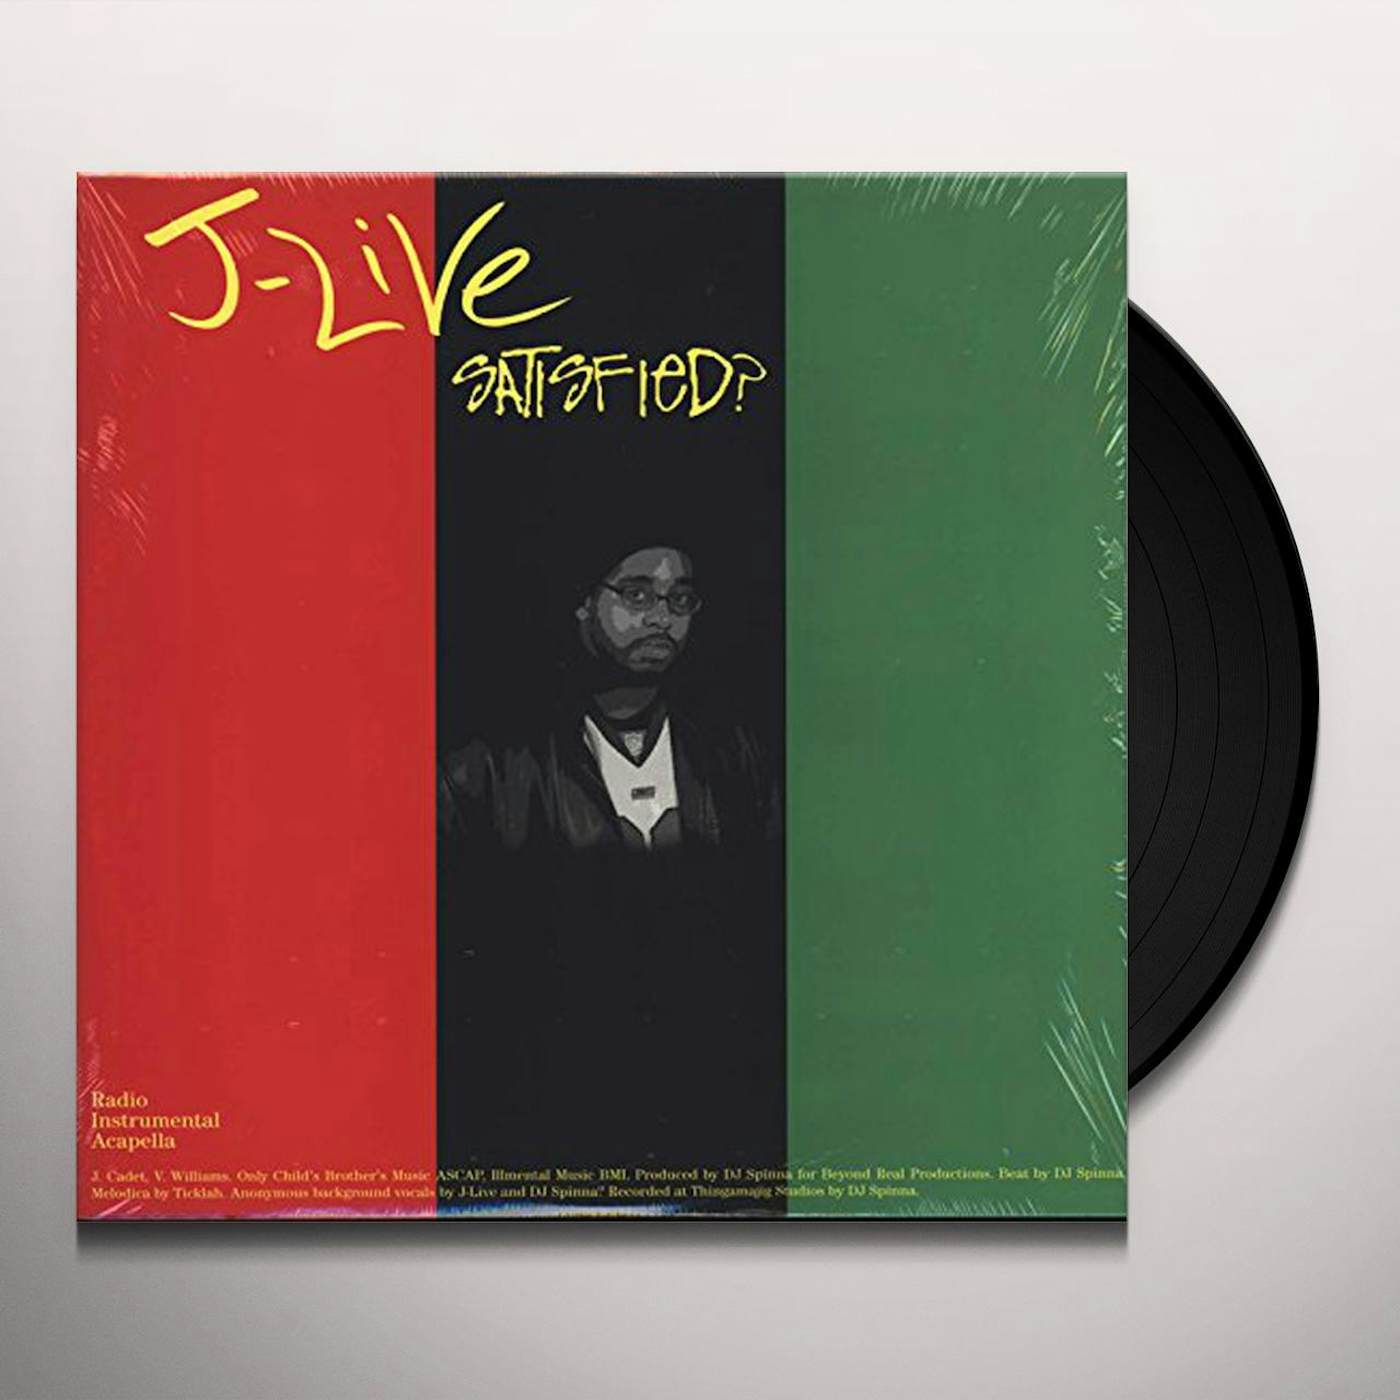 J-Live SATISFIED / A CHANGED LIFE Vinyl Record